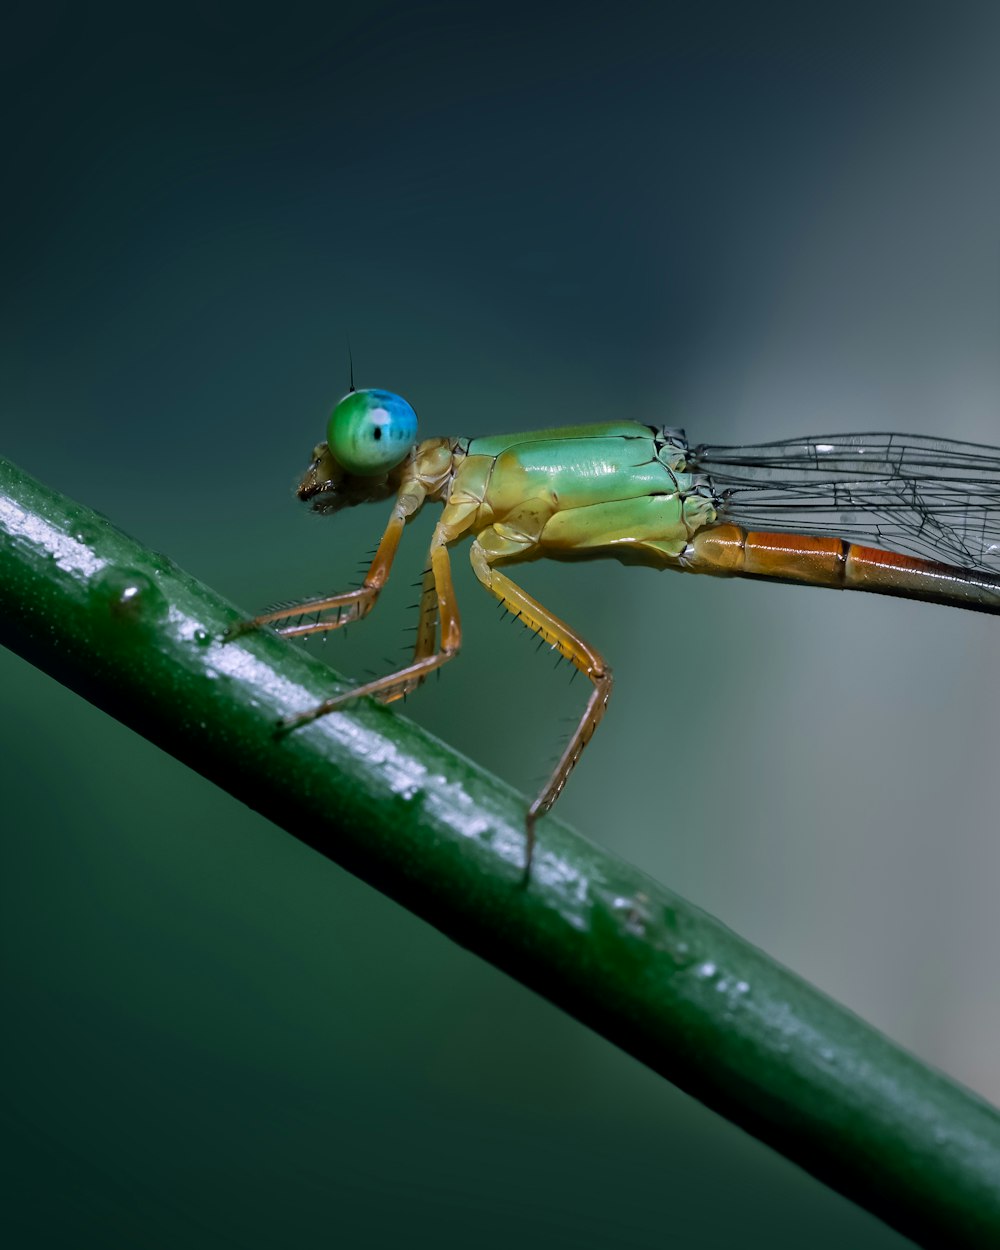 a close up of a dragonfly on a green stem